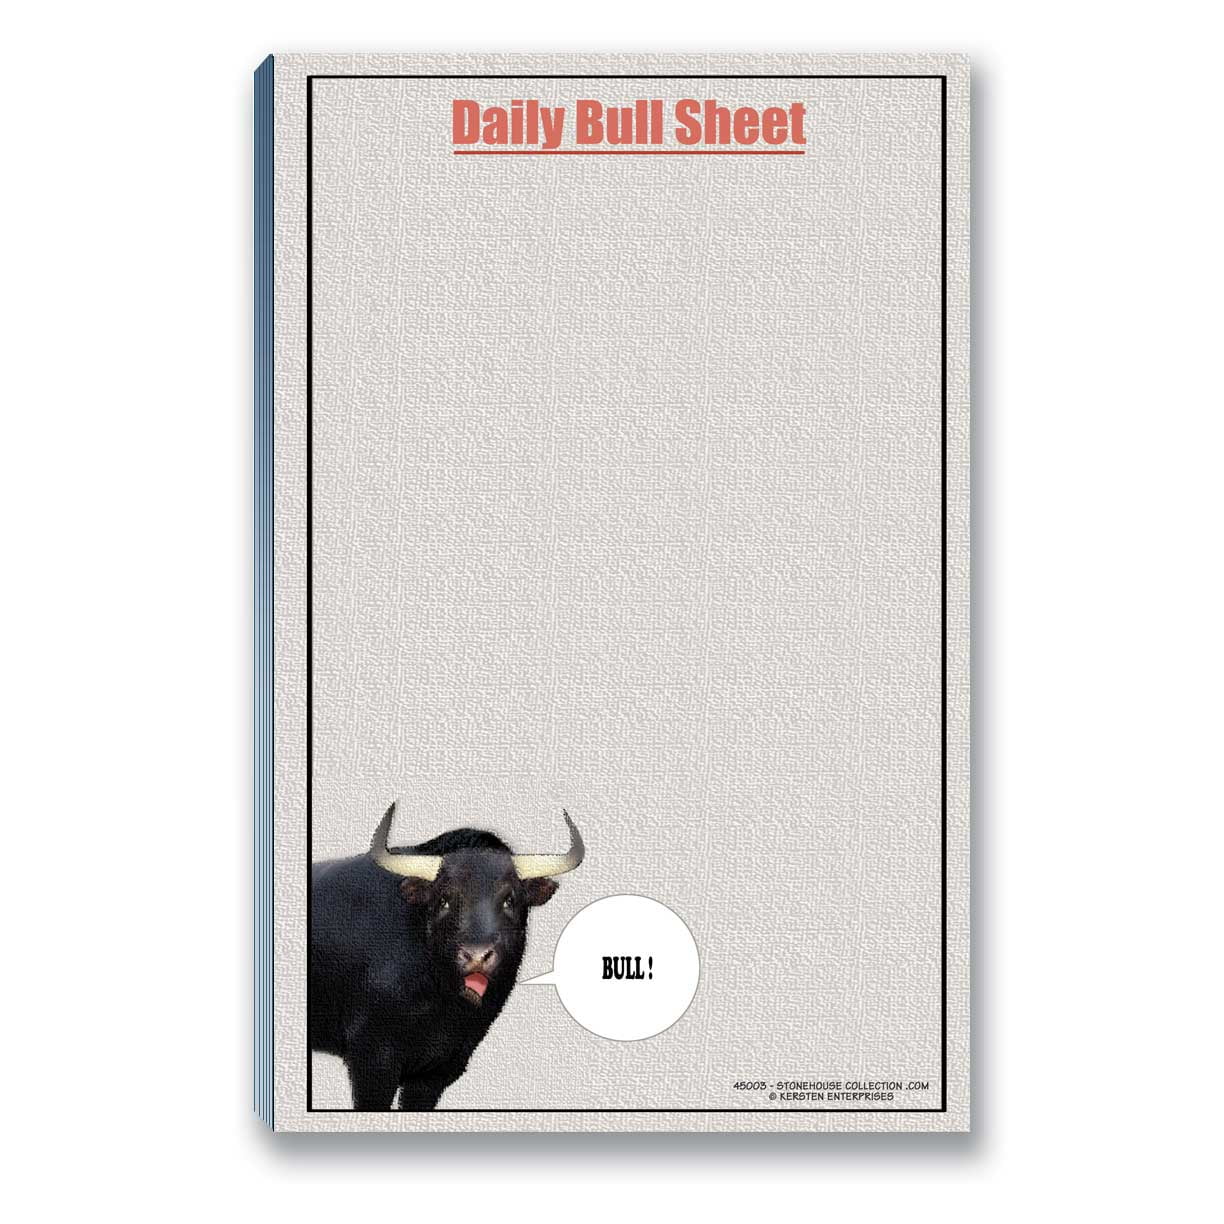 4 Novelty Notepads Funny Office Supplies 4 Funny Notepad Assorted Pack Funny Office Notepads Funny #1